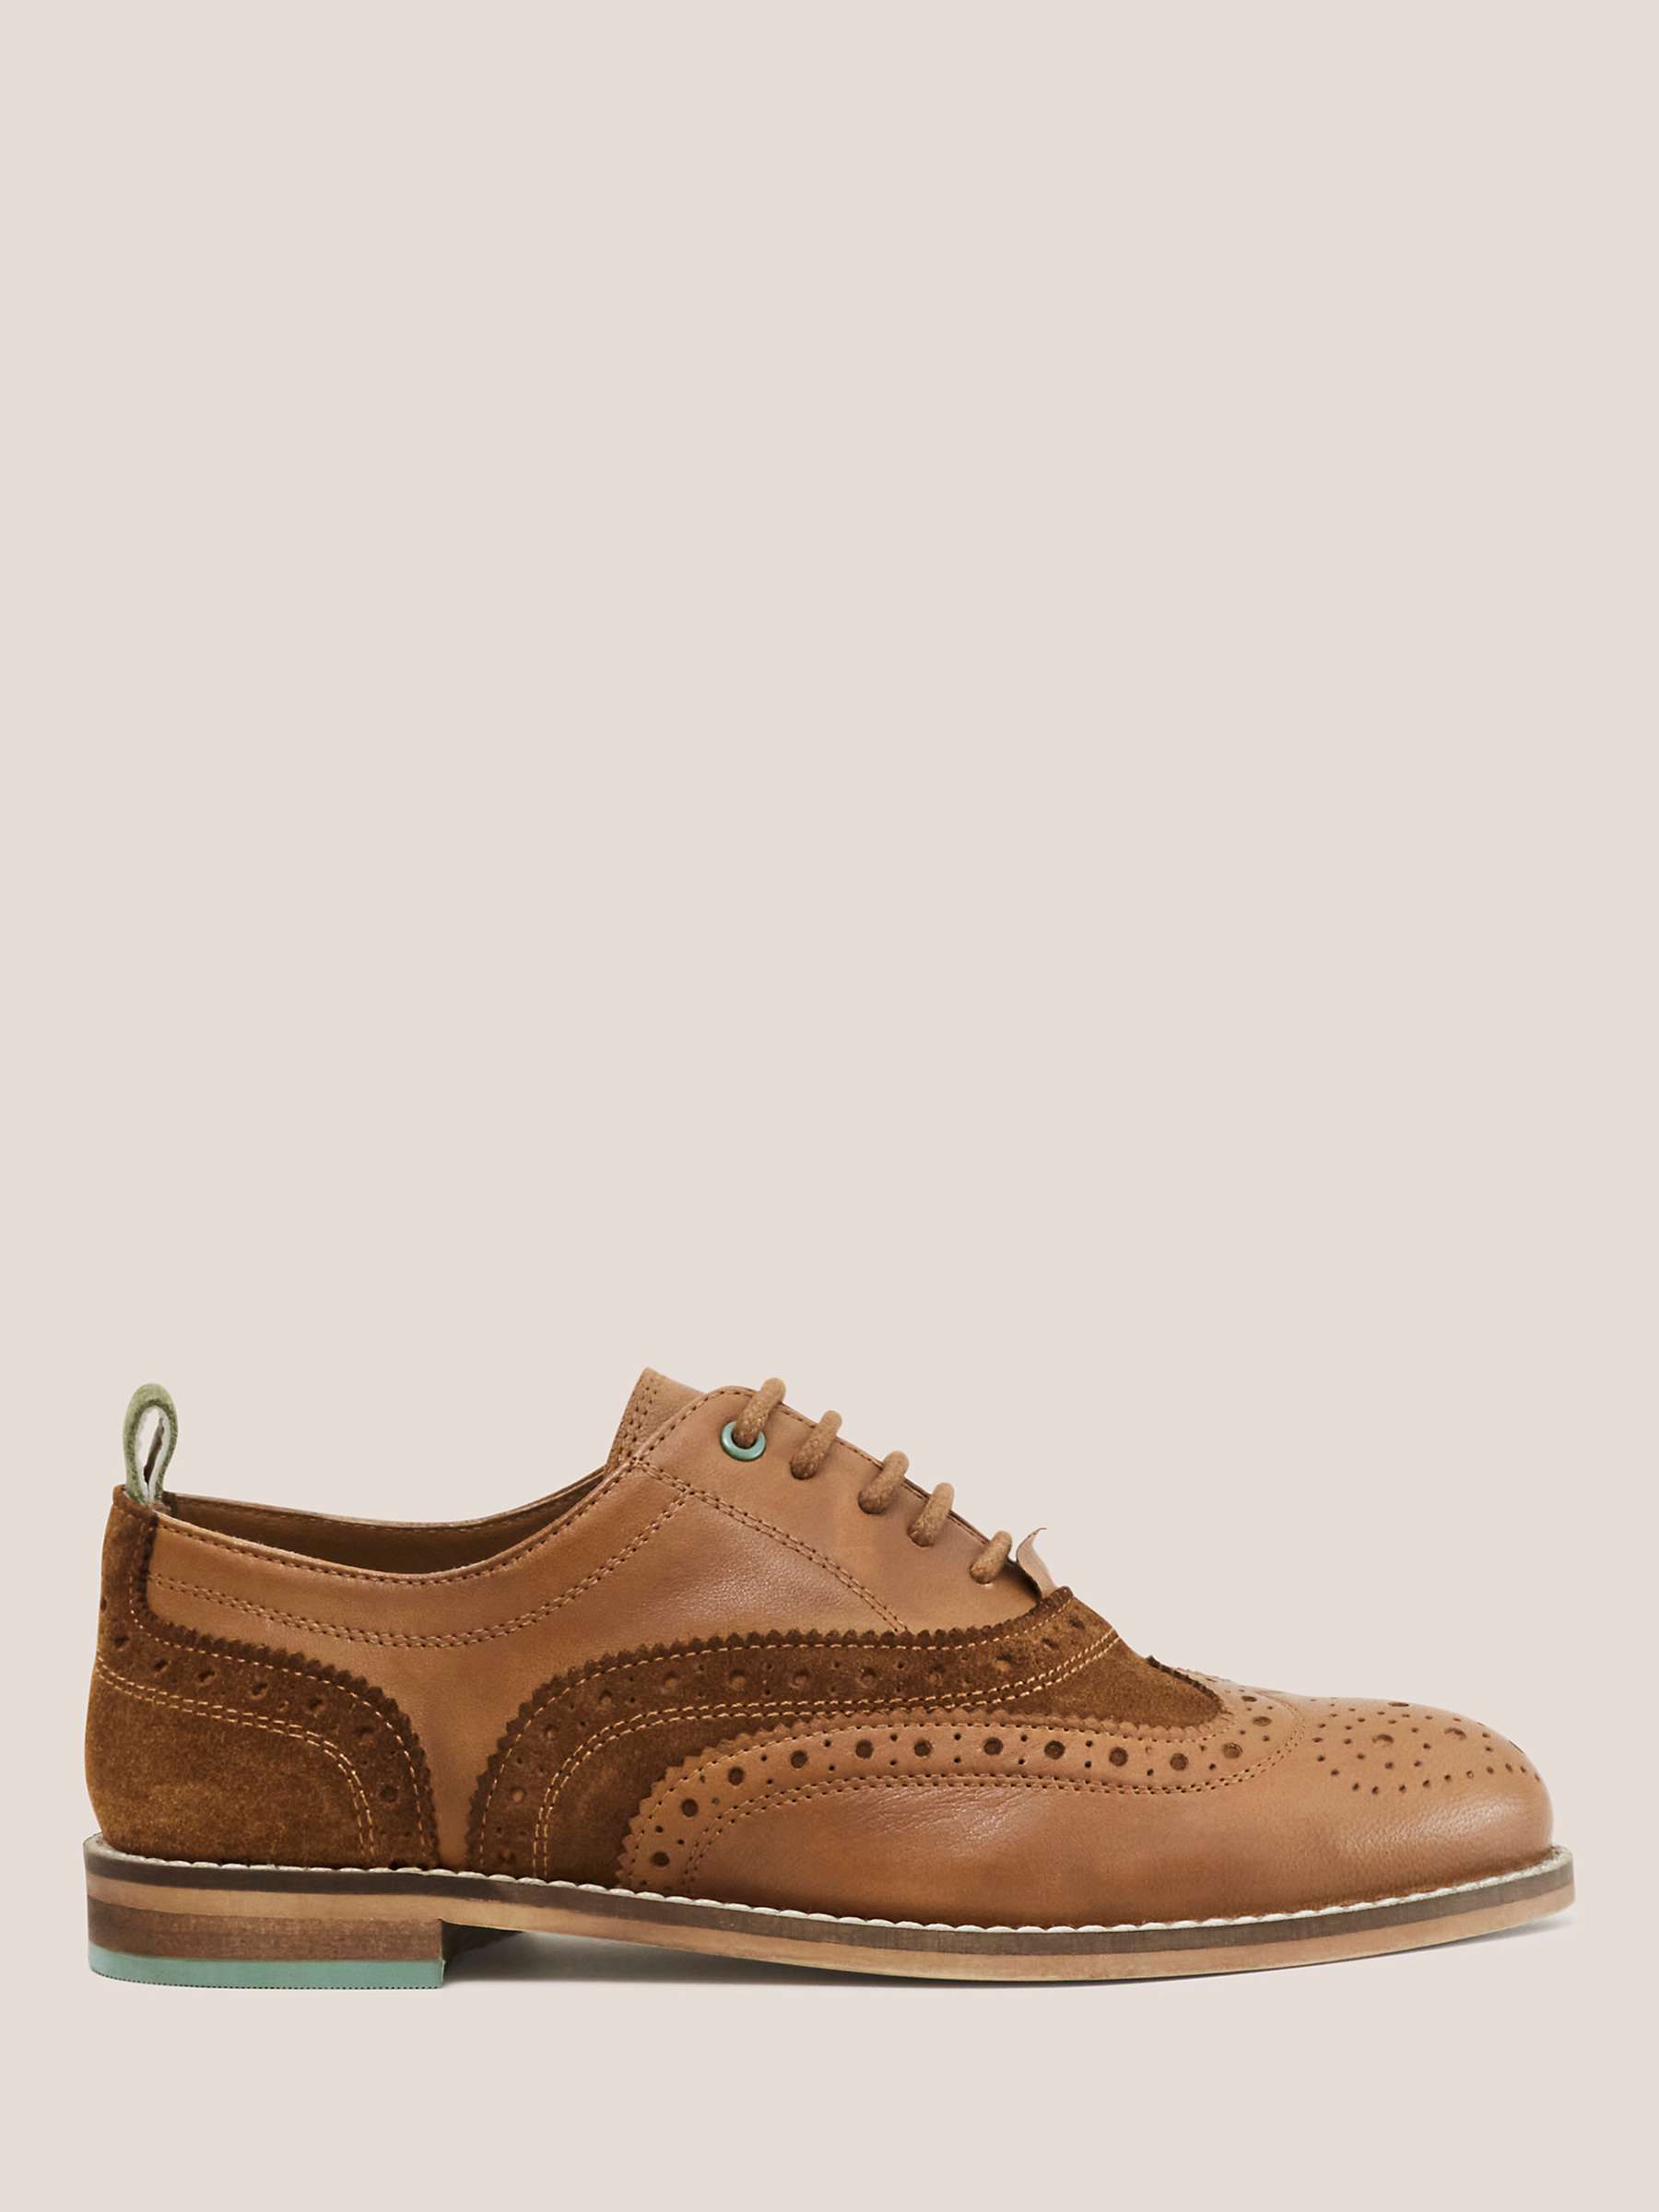 Buy White Stuff Leather Lace Up Brogues, Dark Tan Online at johnlewis.com